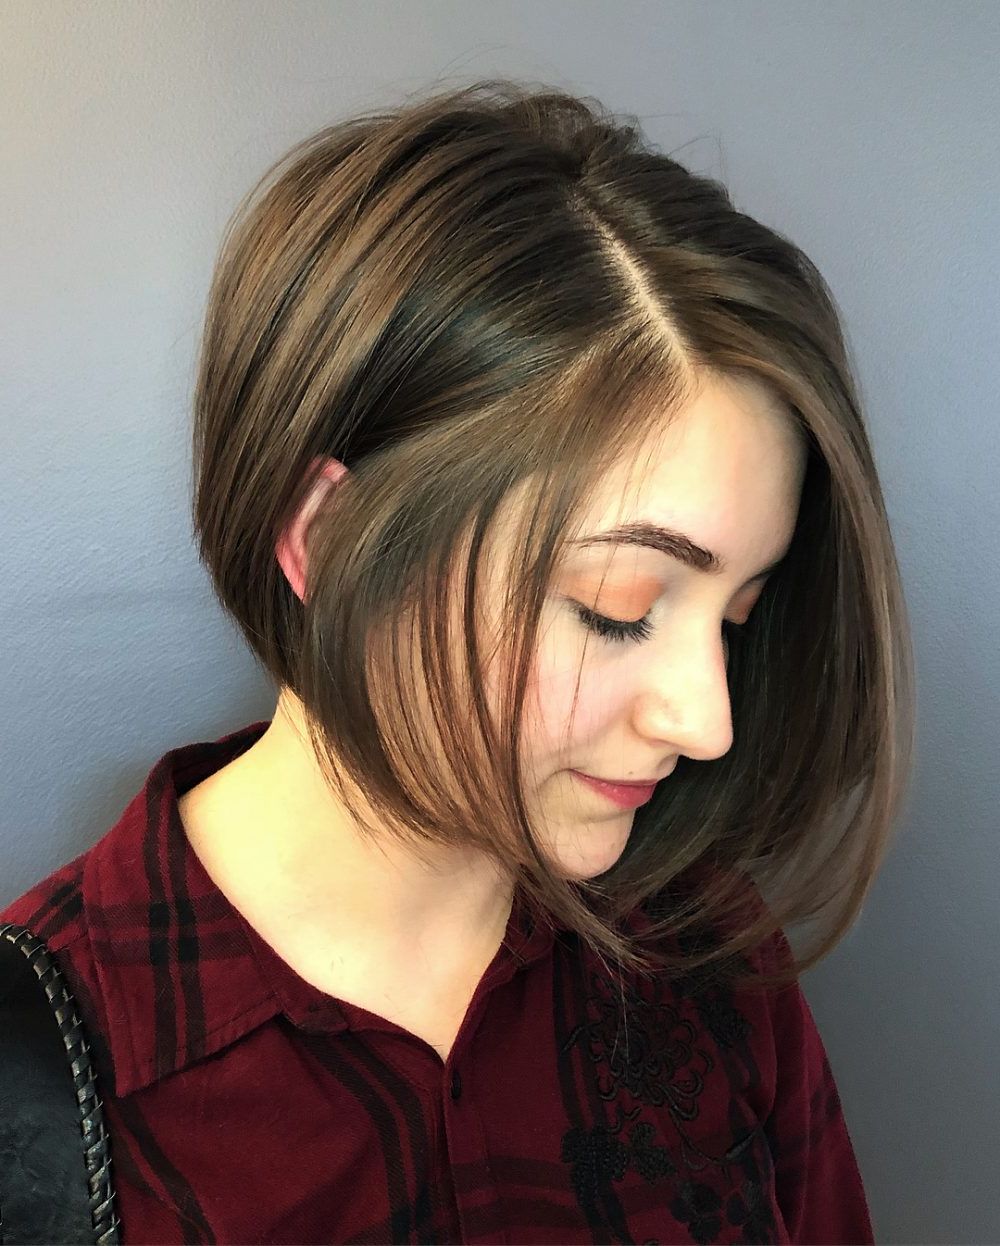 33 Flattering Short Hairstyles For Round Faces In 2018 Throughout Short Hairstyles With Bangs And Layers For Round Faces (View 2 of 25)